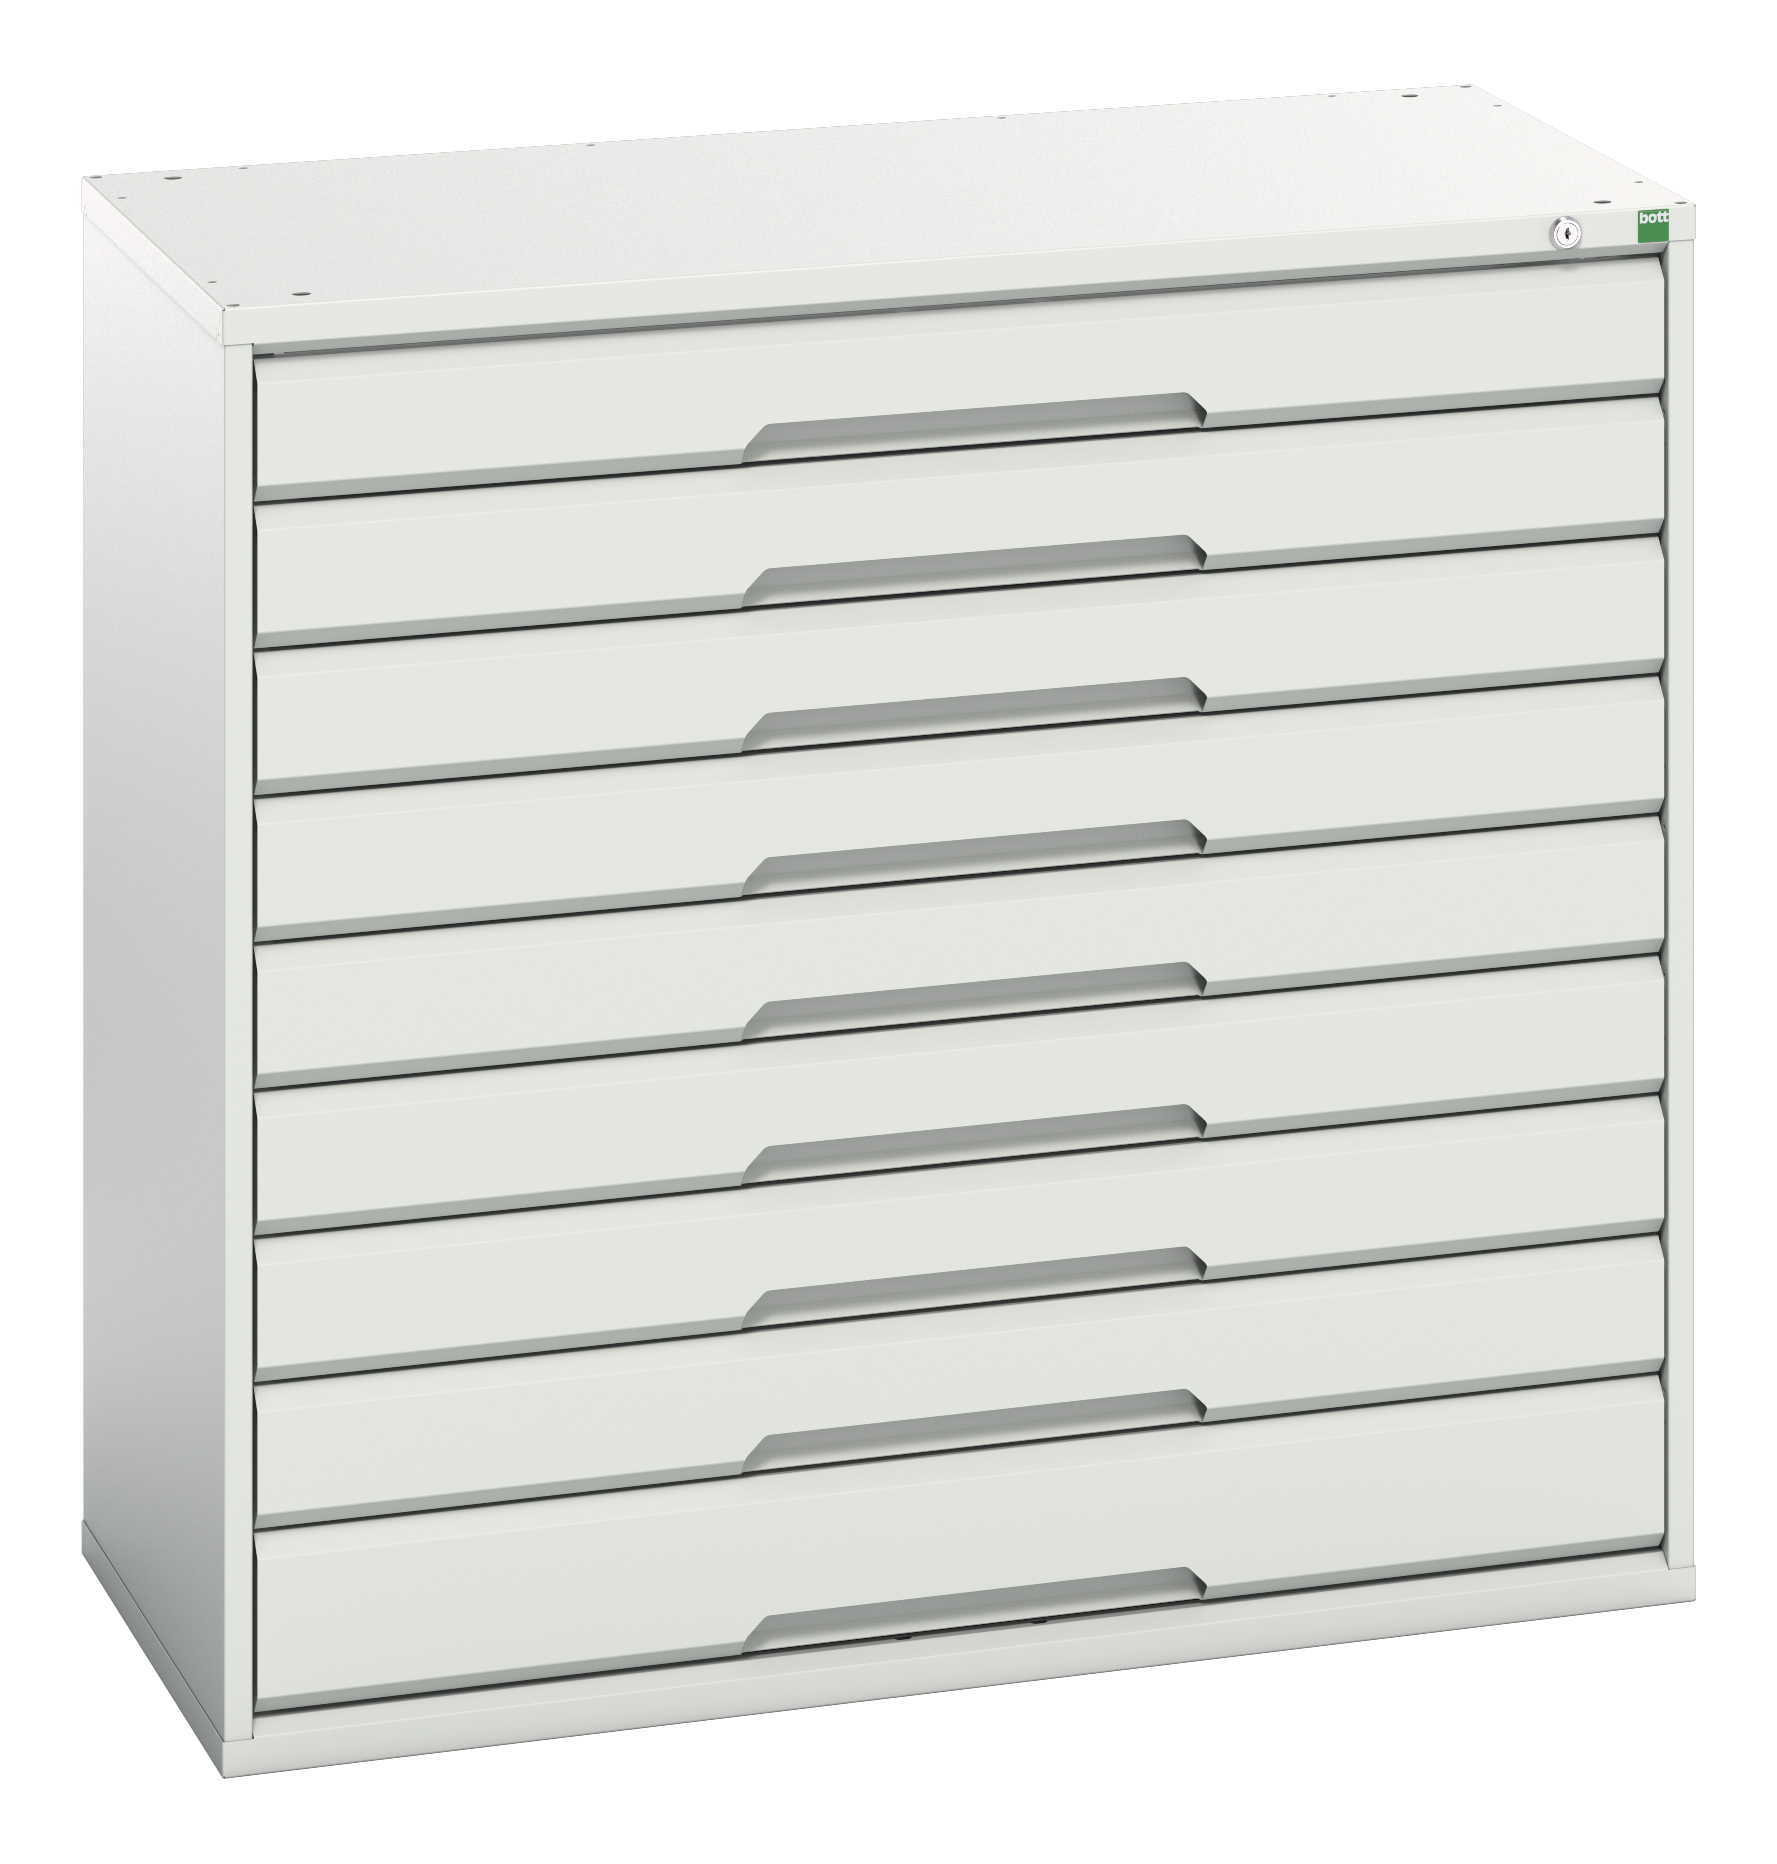 Bott Verso Drawer Cabinet With 9 Drawers - 16925257.16